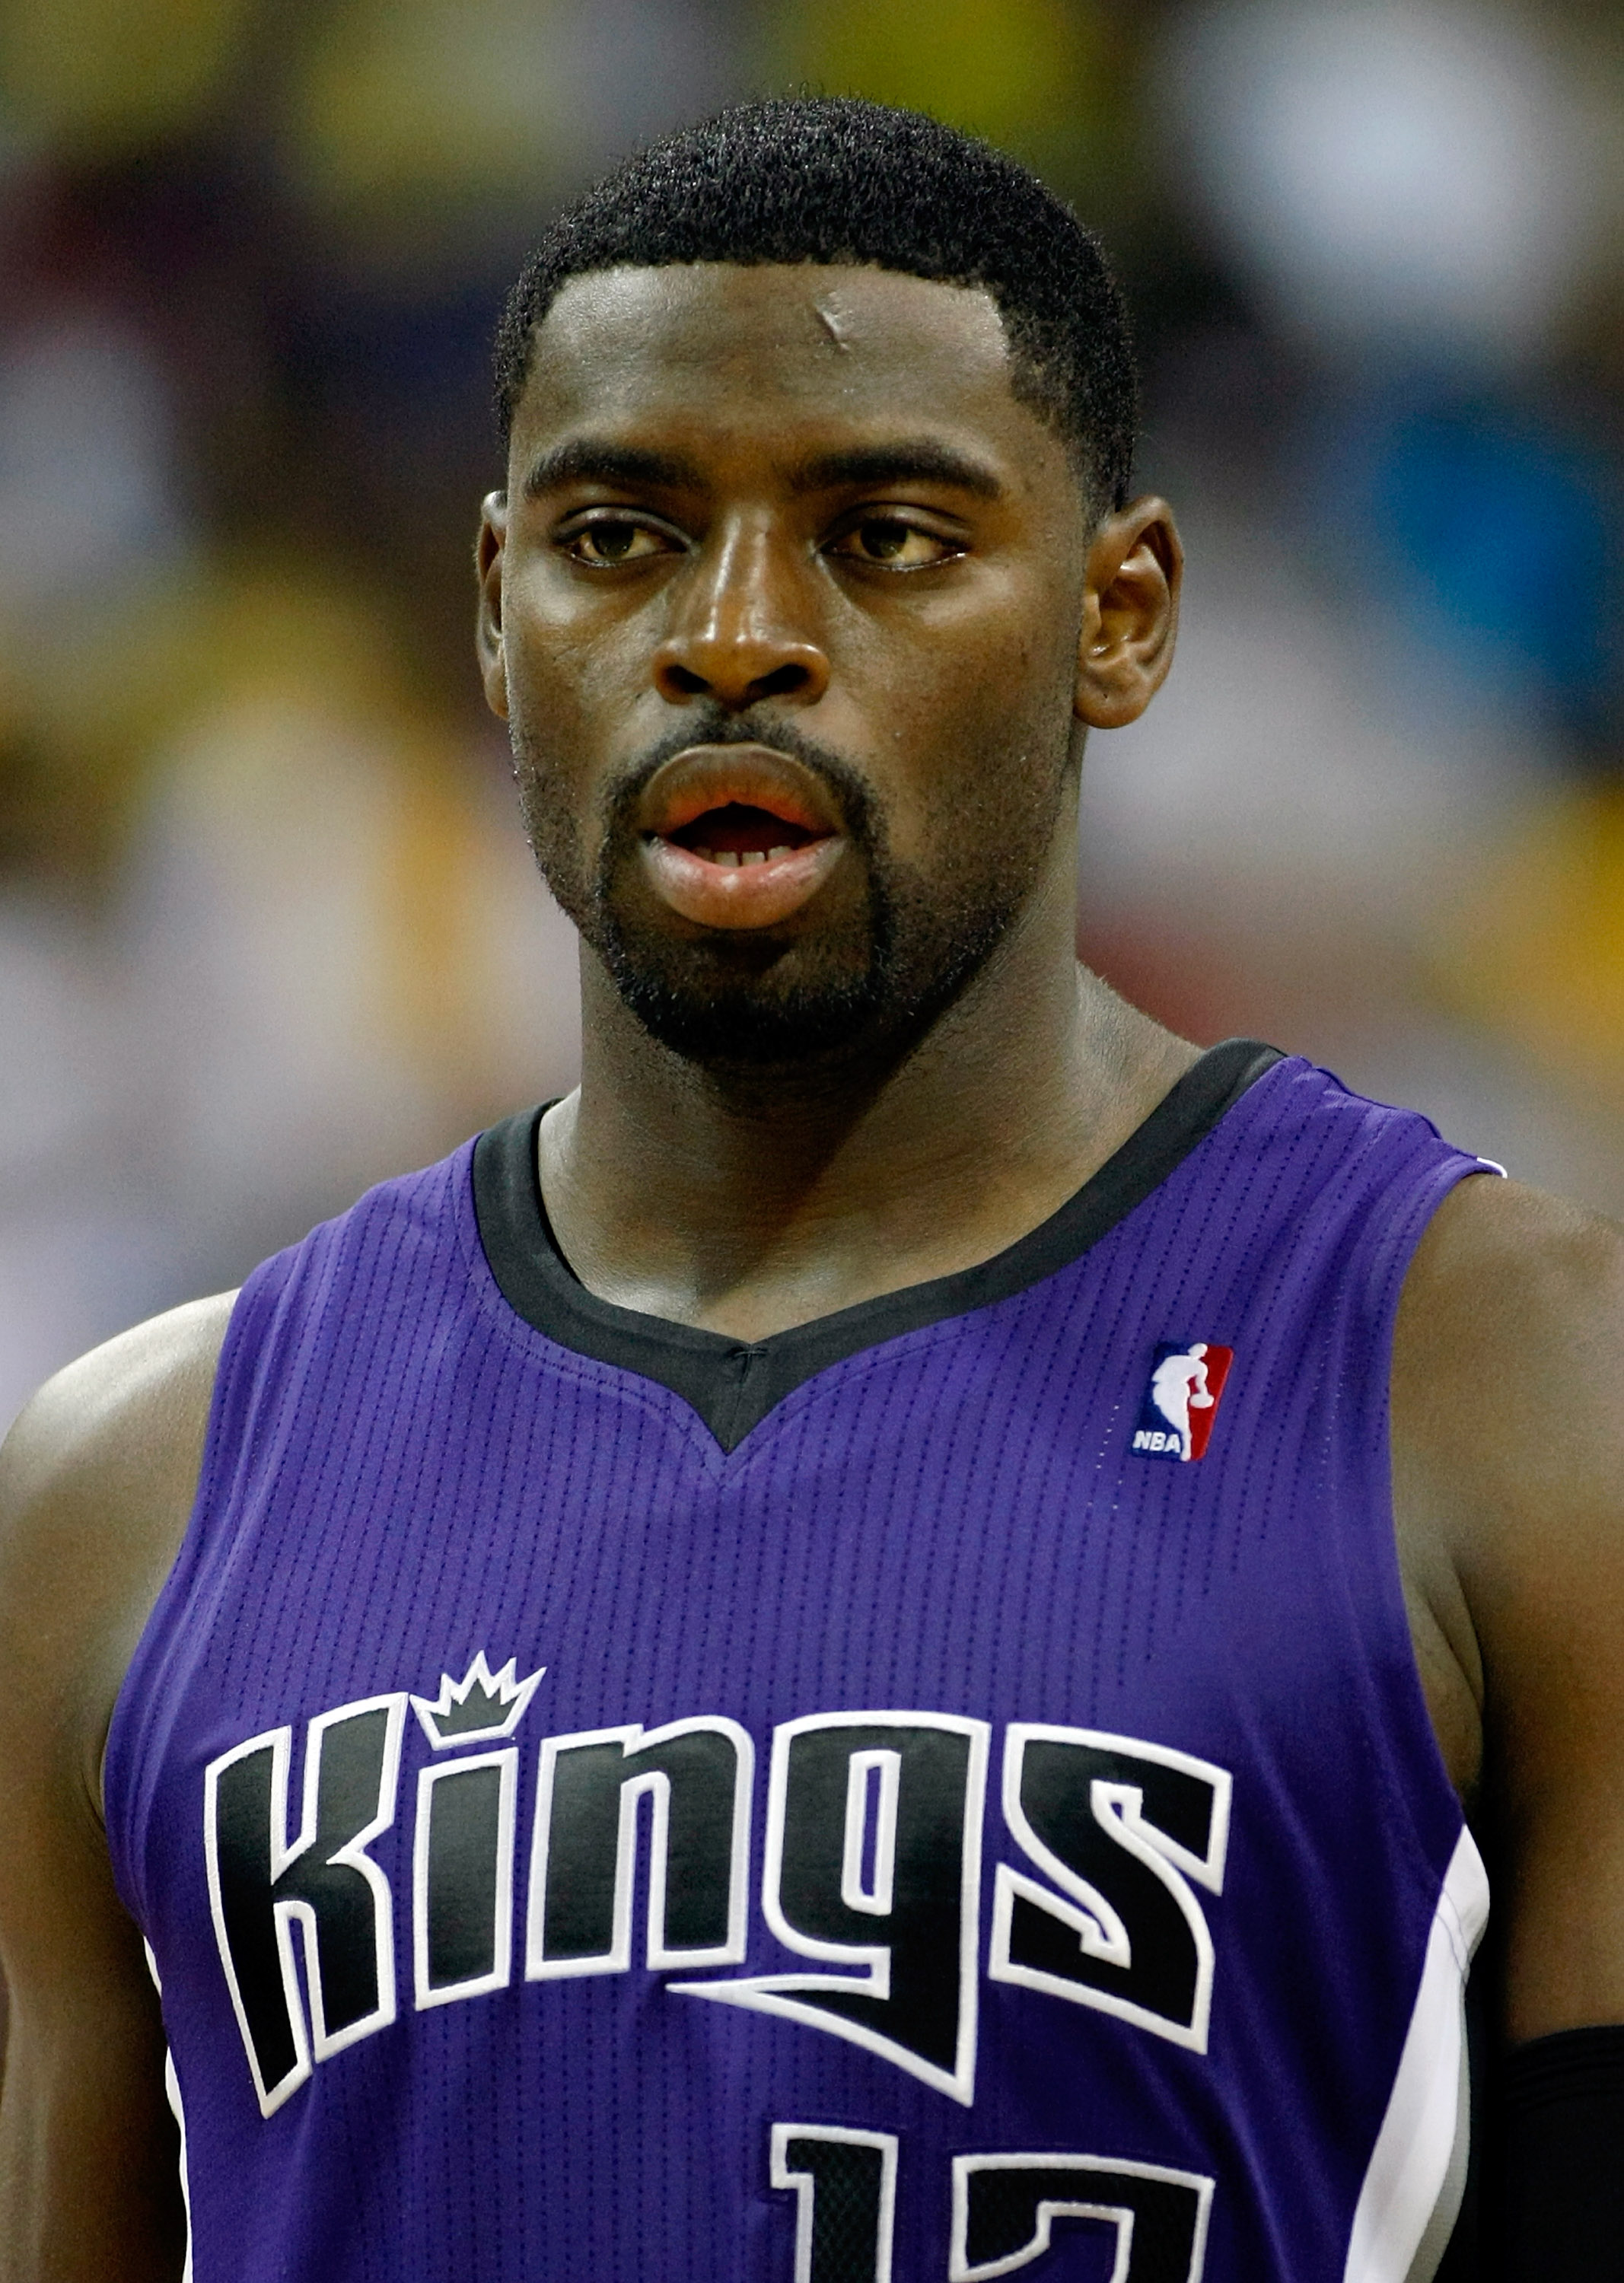 LAS VEGAS - OCTOBER 13:  Tyreke Evans #13 of the Sacramento Kings stands on the court during a preseason game against the Los Angeles Lakers at the Thomas & Mack Center October 13, 2010 in Las Vegas, Nevada. The Lakers won 98-95. NOTE TO USER: User expres